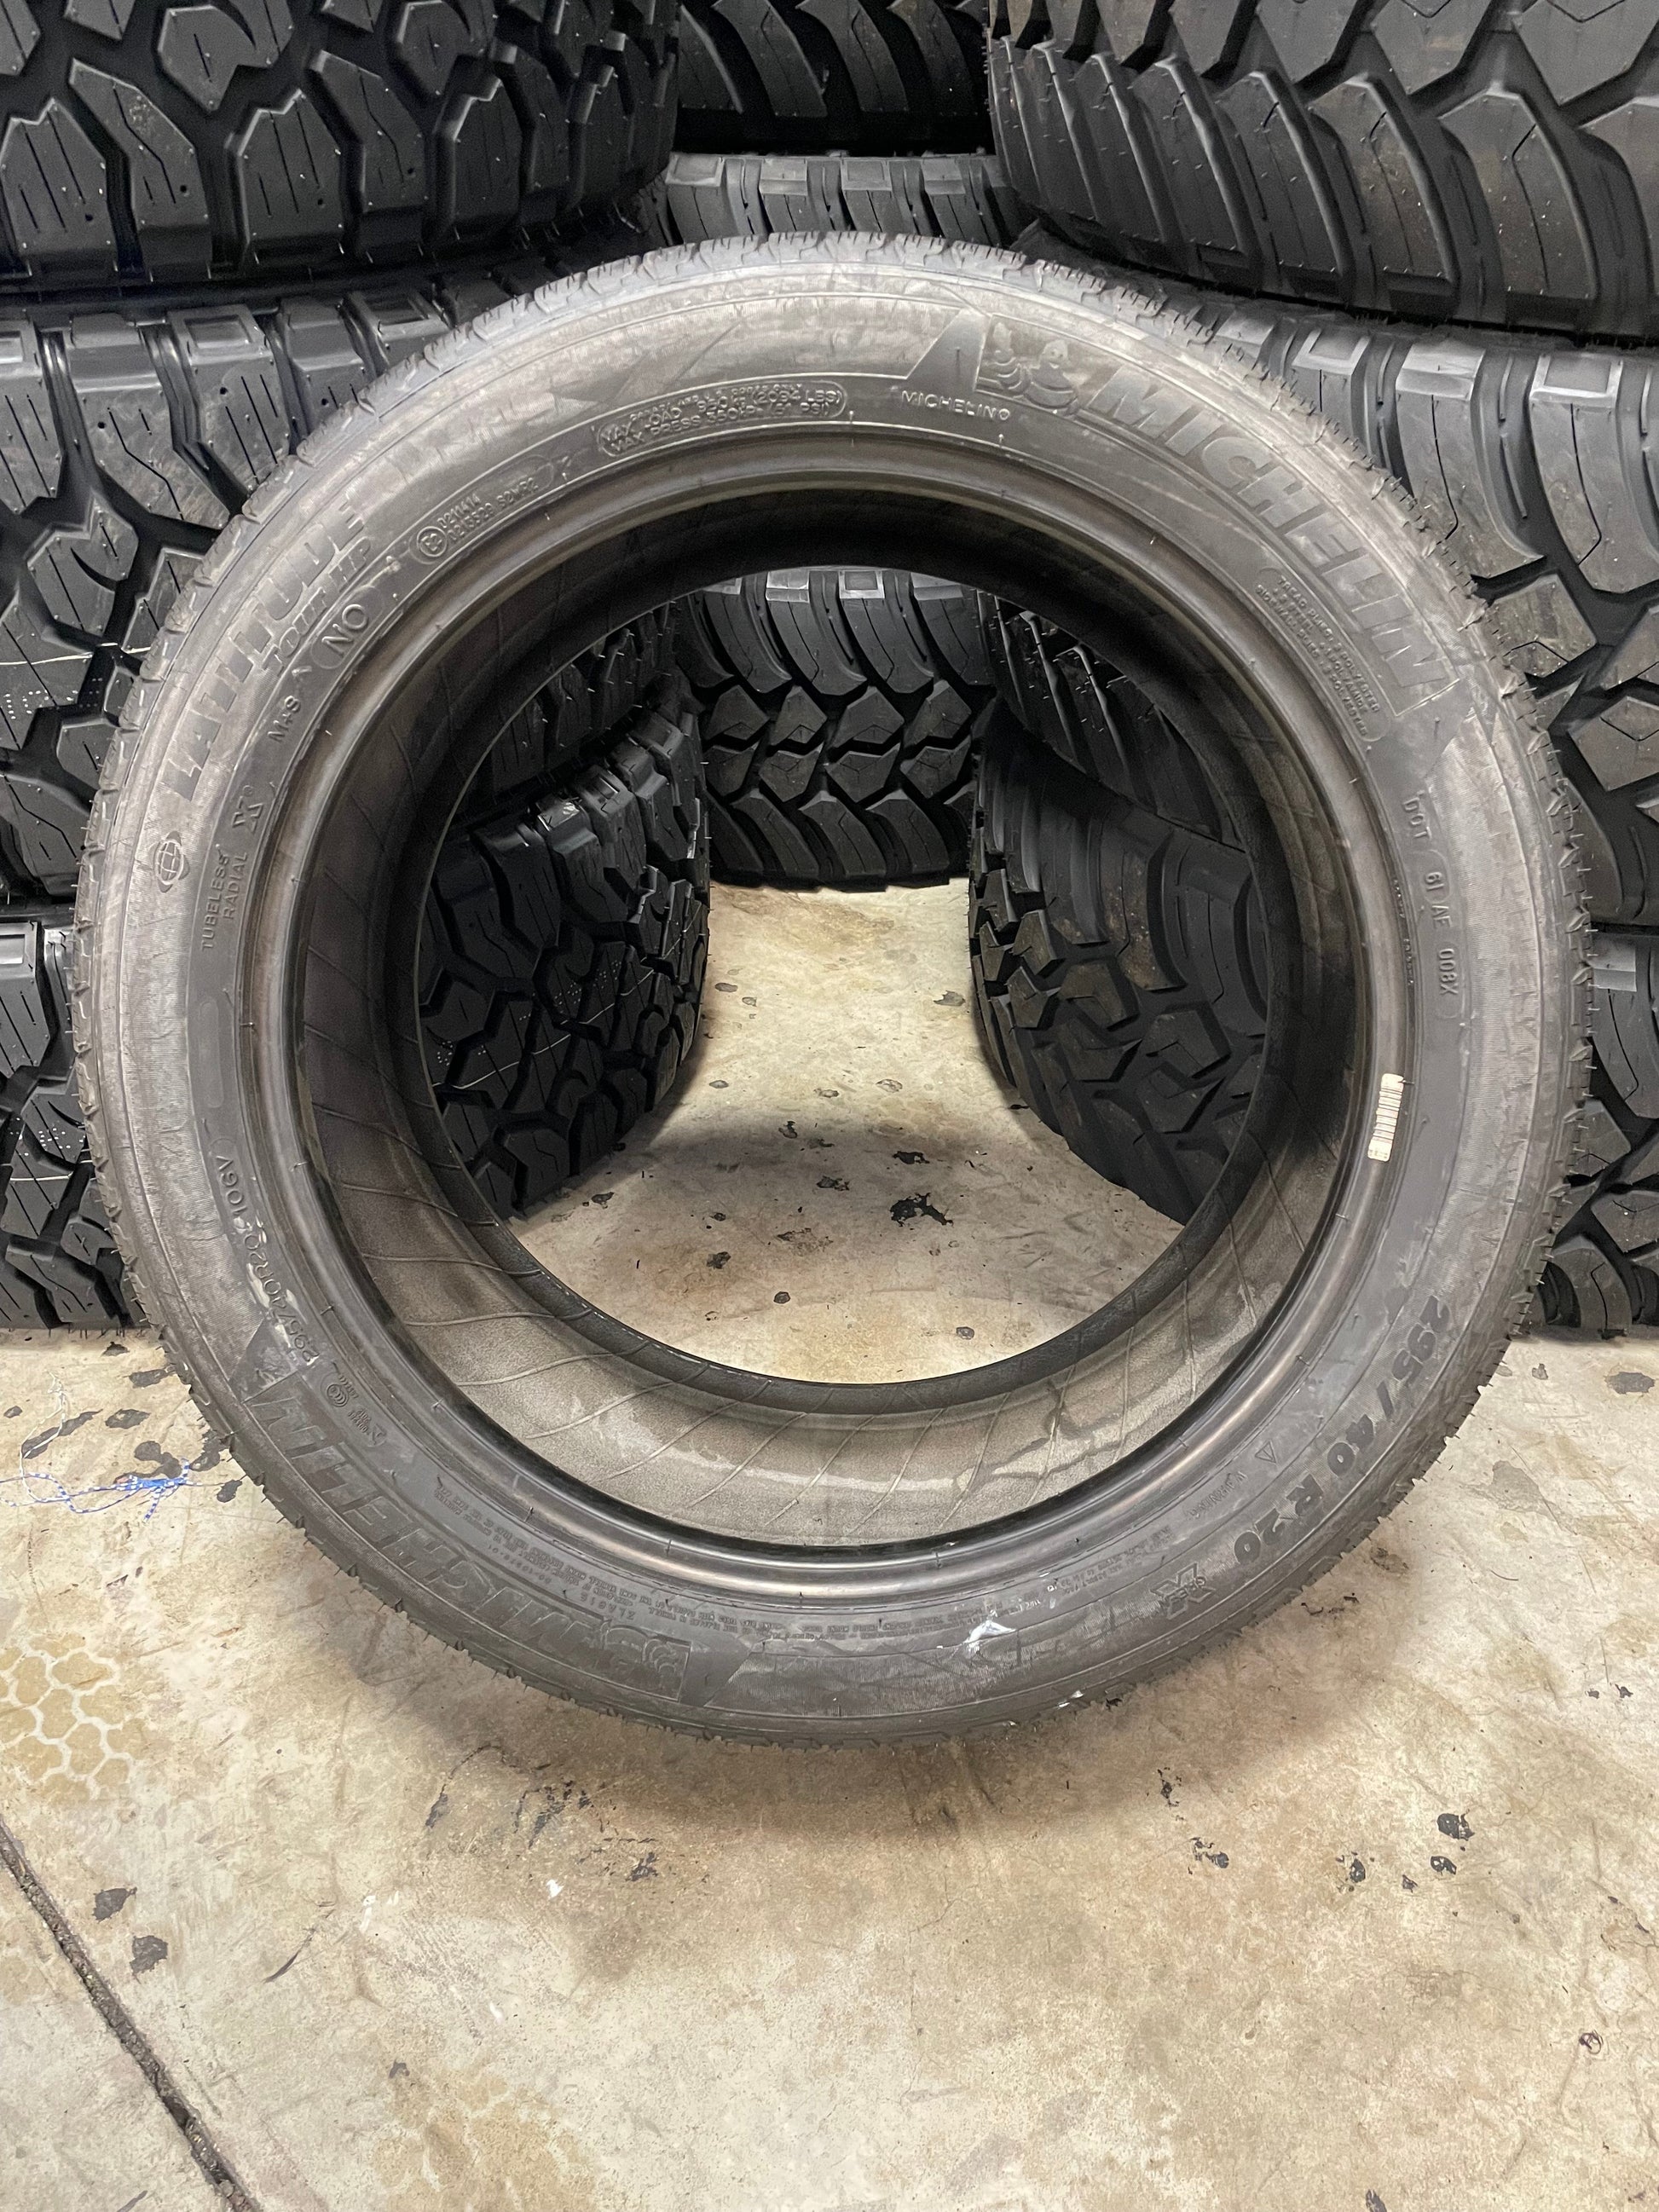 SINGLE 295/40R20 Michelin Latitude Tour HP 106 Y XL - Used Tires